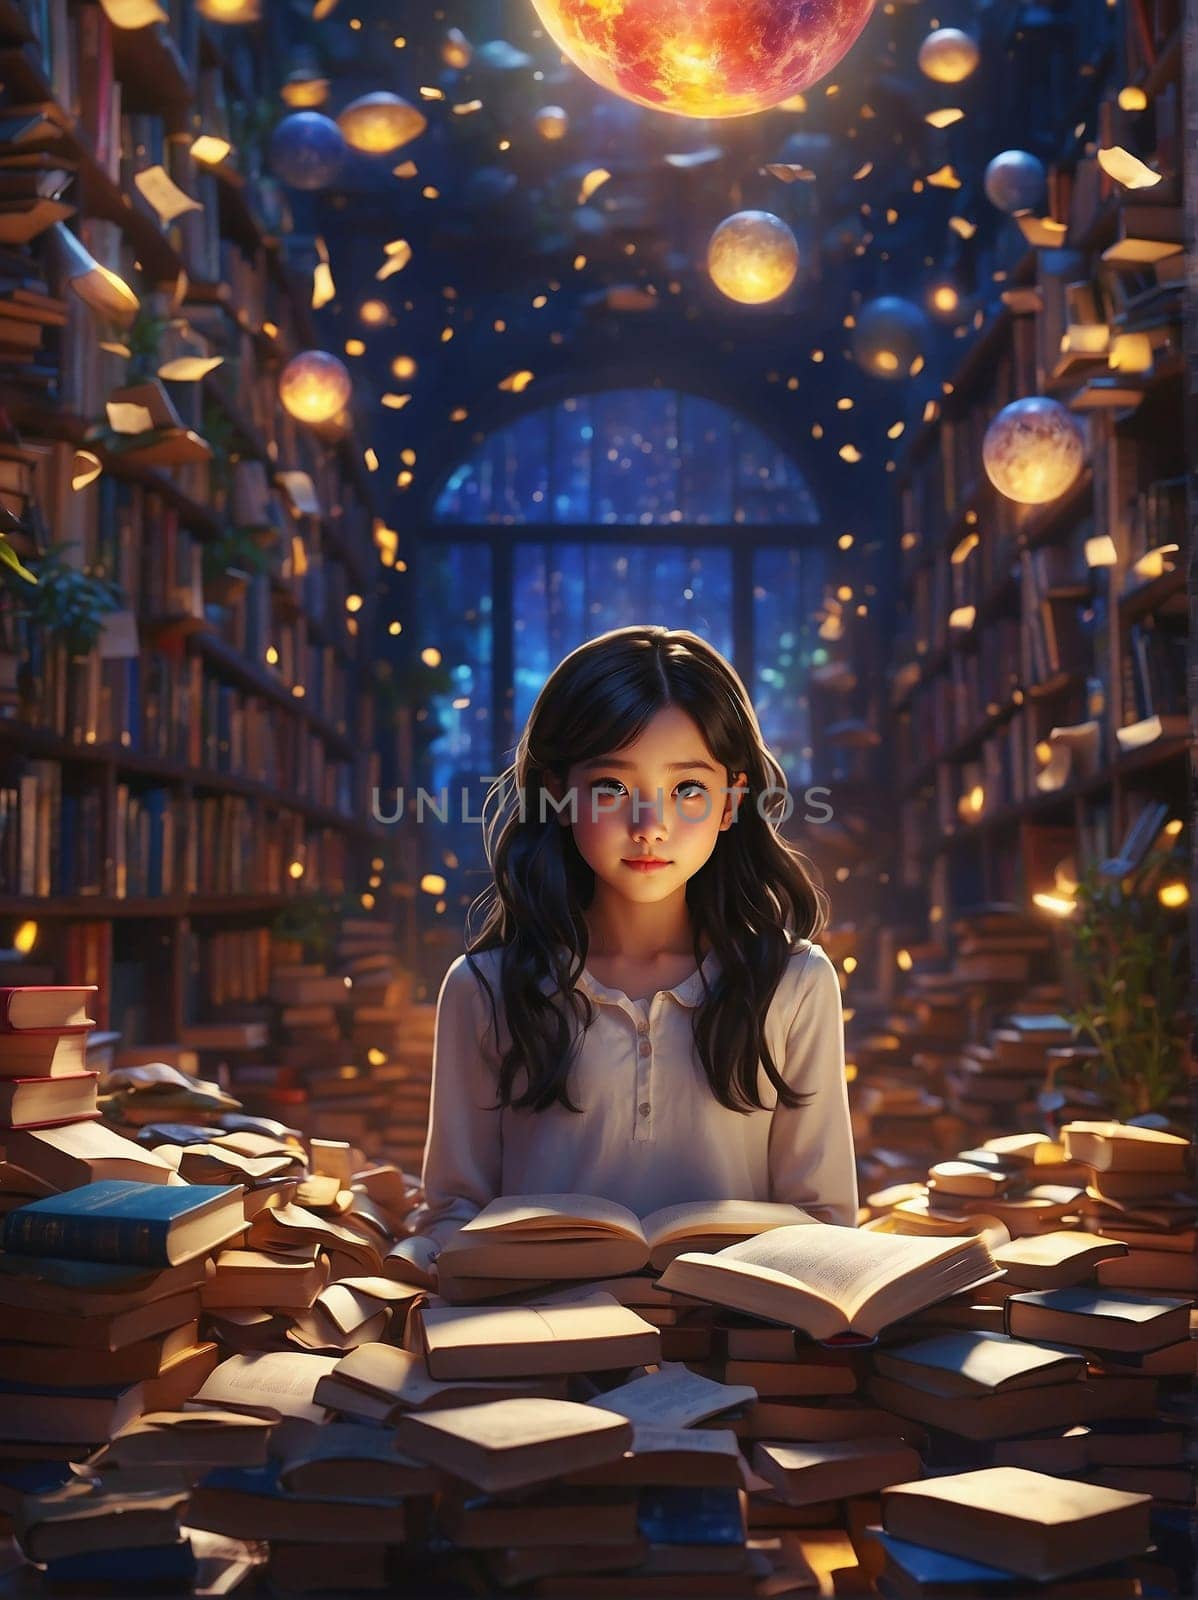 A young girl sits at a table surrounded by an abundance of books in a library.